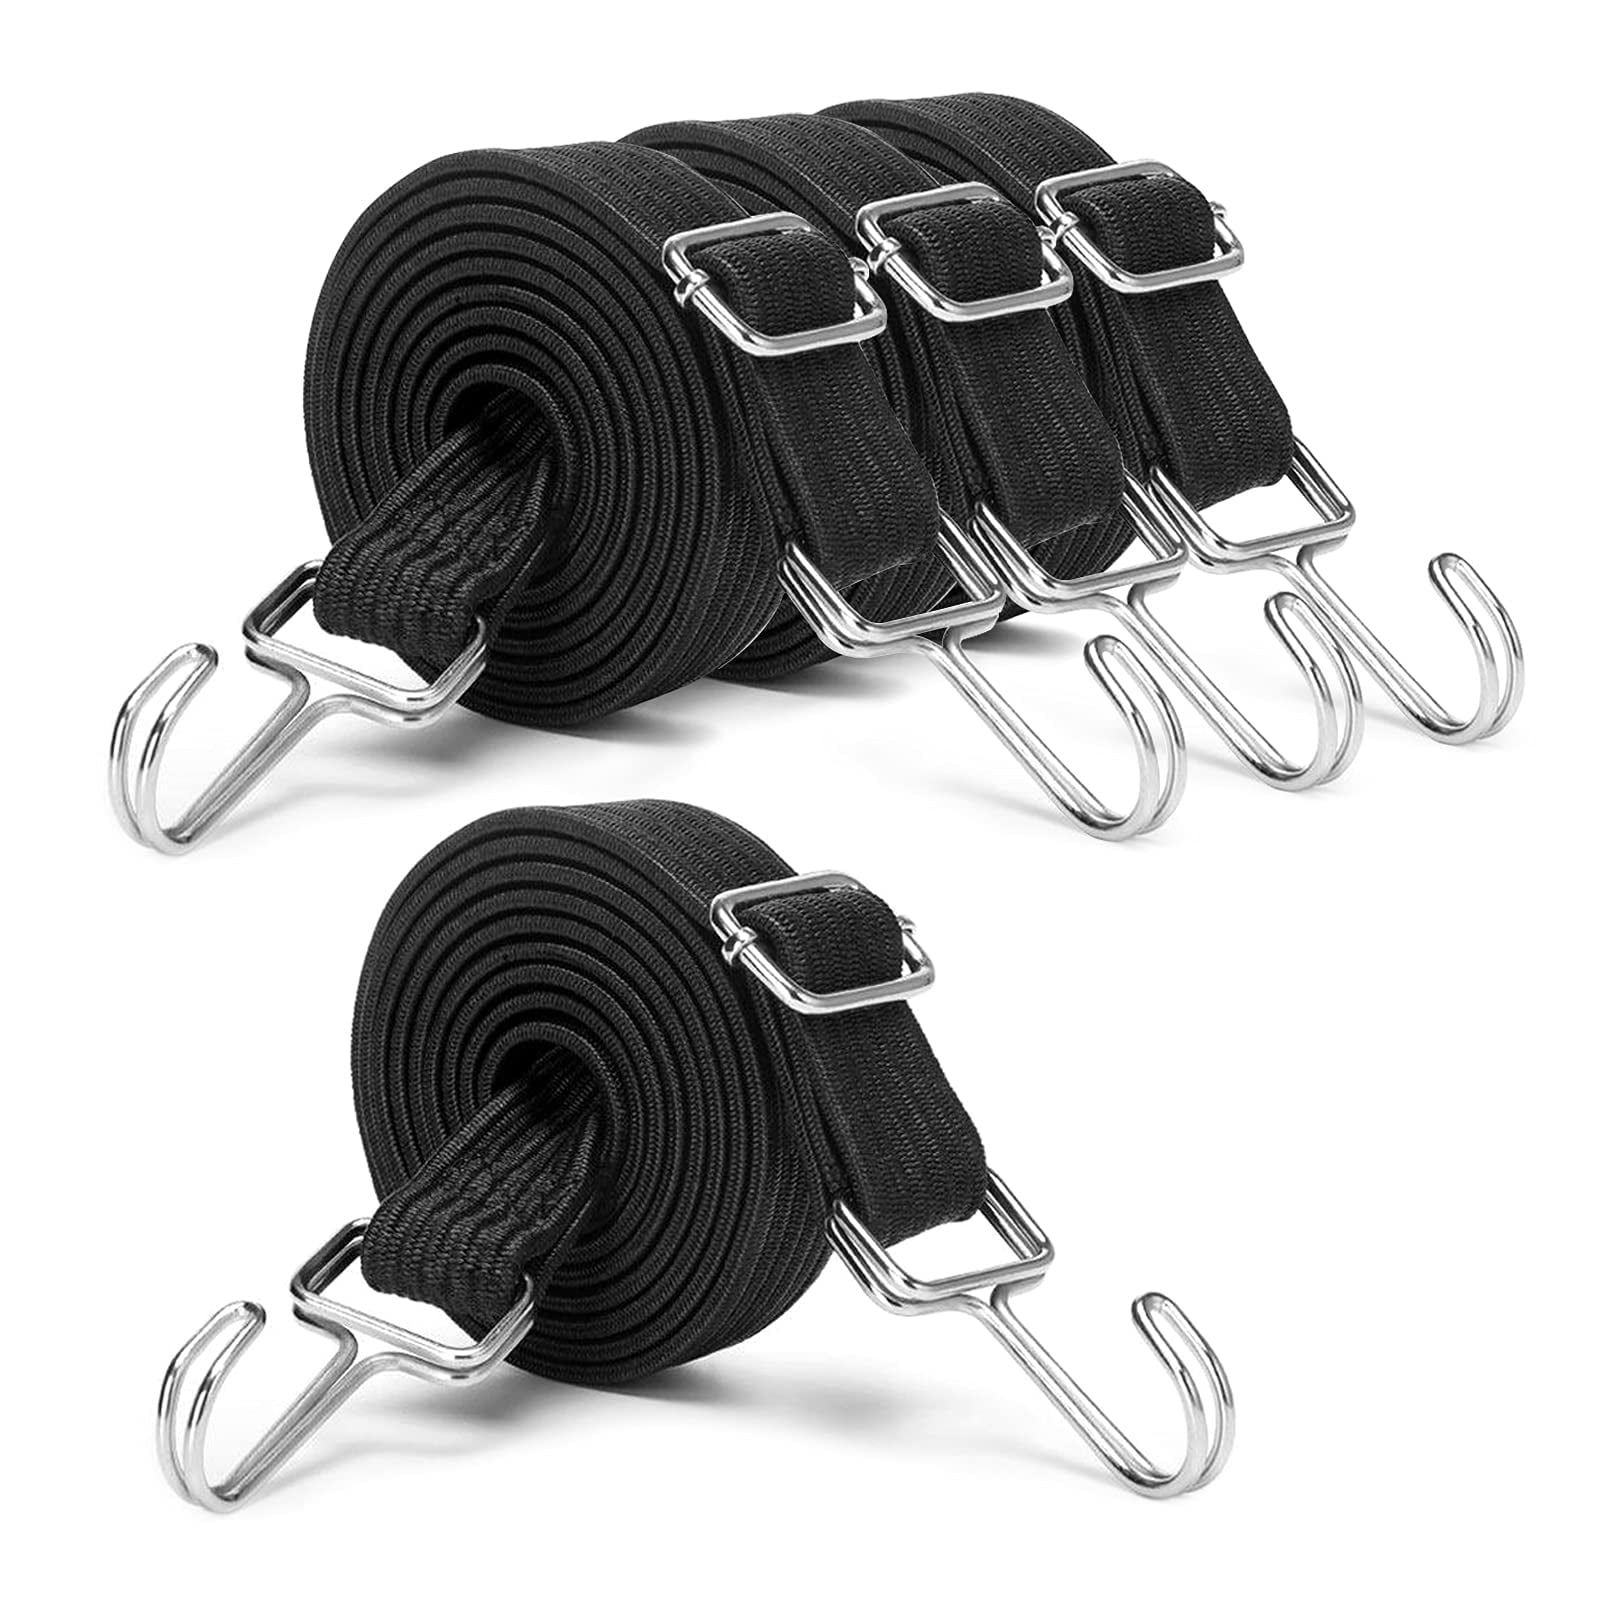 INCETUE 1m Long Bungee Cords with Carabiner Hooks, 6 Pack Black Heavy Duty  Latex Elastic Rope, Extra Strong Elasticity Straps with Metal Tie Downs for